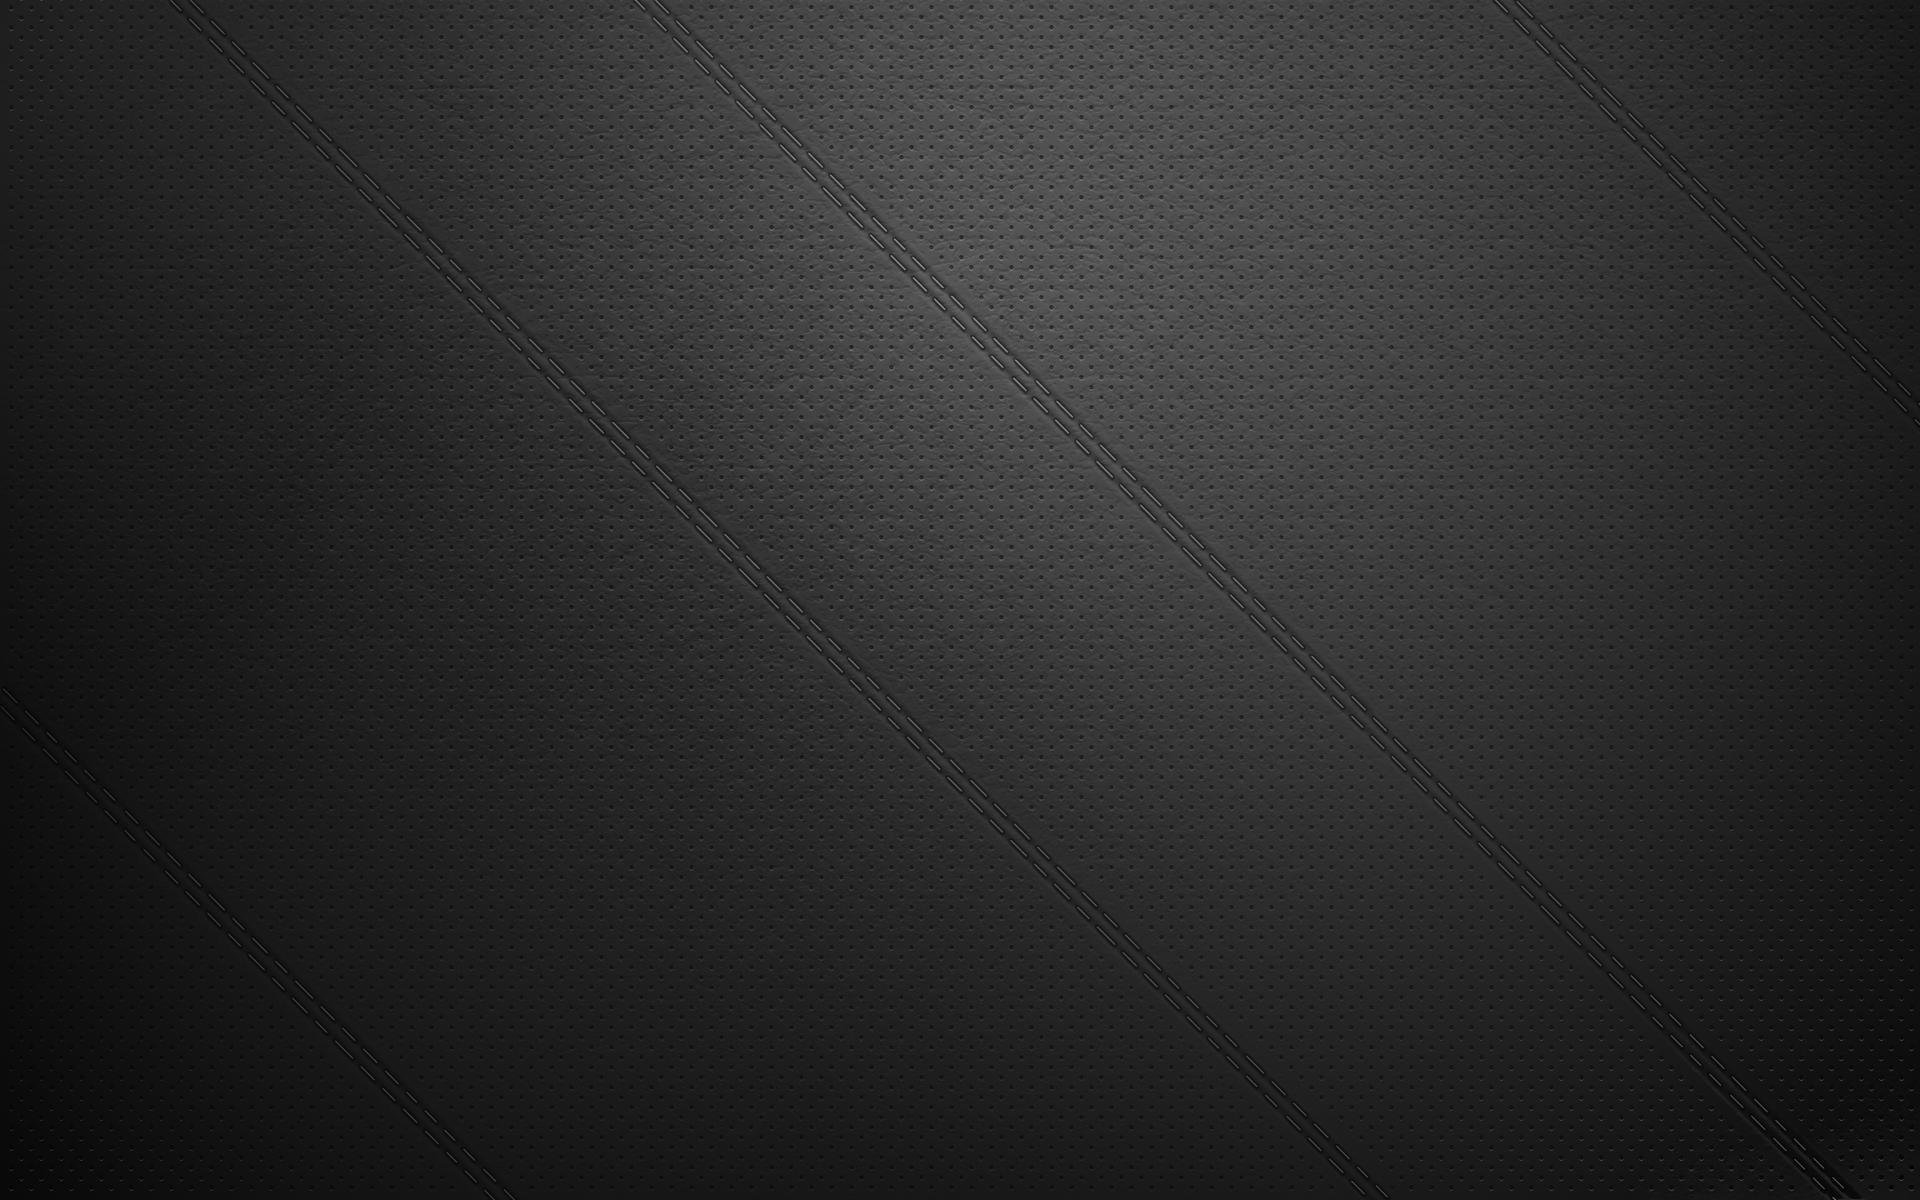 Cool Pattern Wallpapers Android Apps Games On Brothersoft
cool - Plain Black Background Png - HD Wallpaper 